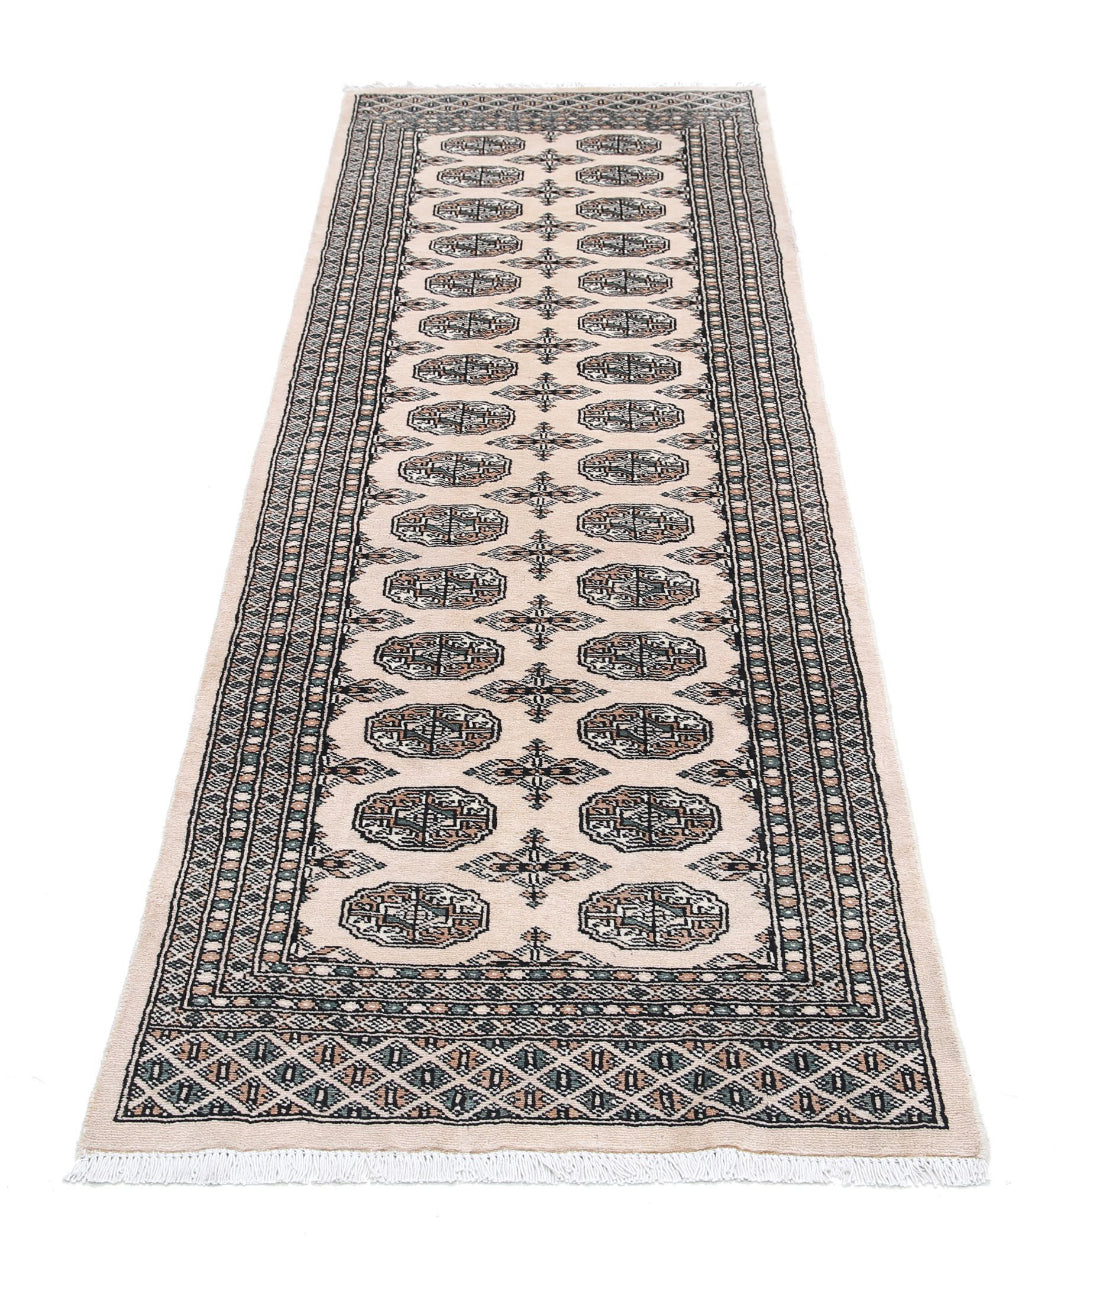 Hand Knotted Tribal Bokhara Wool Rug - 2'6'' x 8'0'' 2'6'' x 8'0'' (75 X 240) / Ivory / Ivory